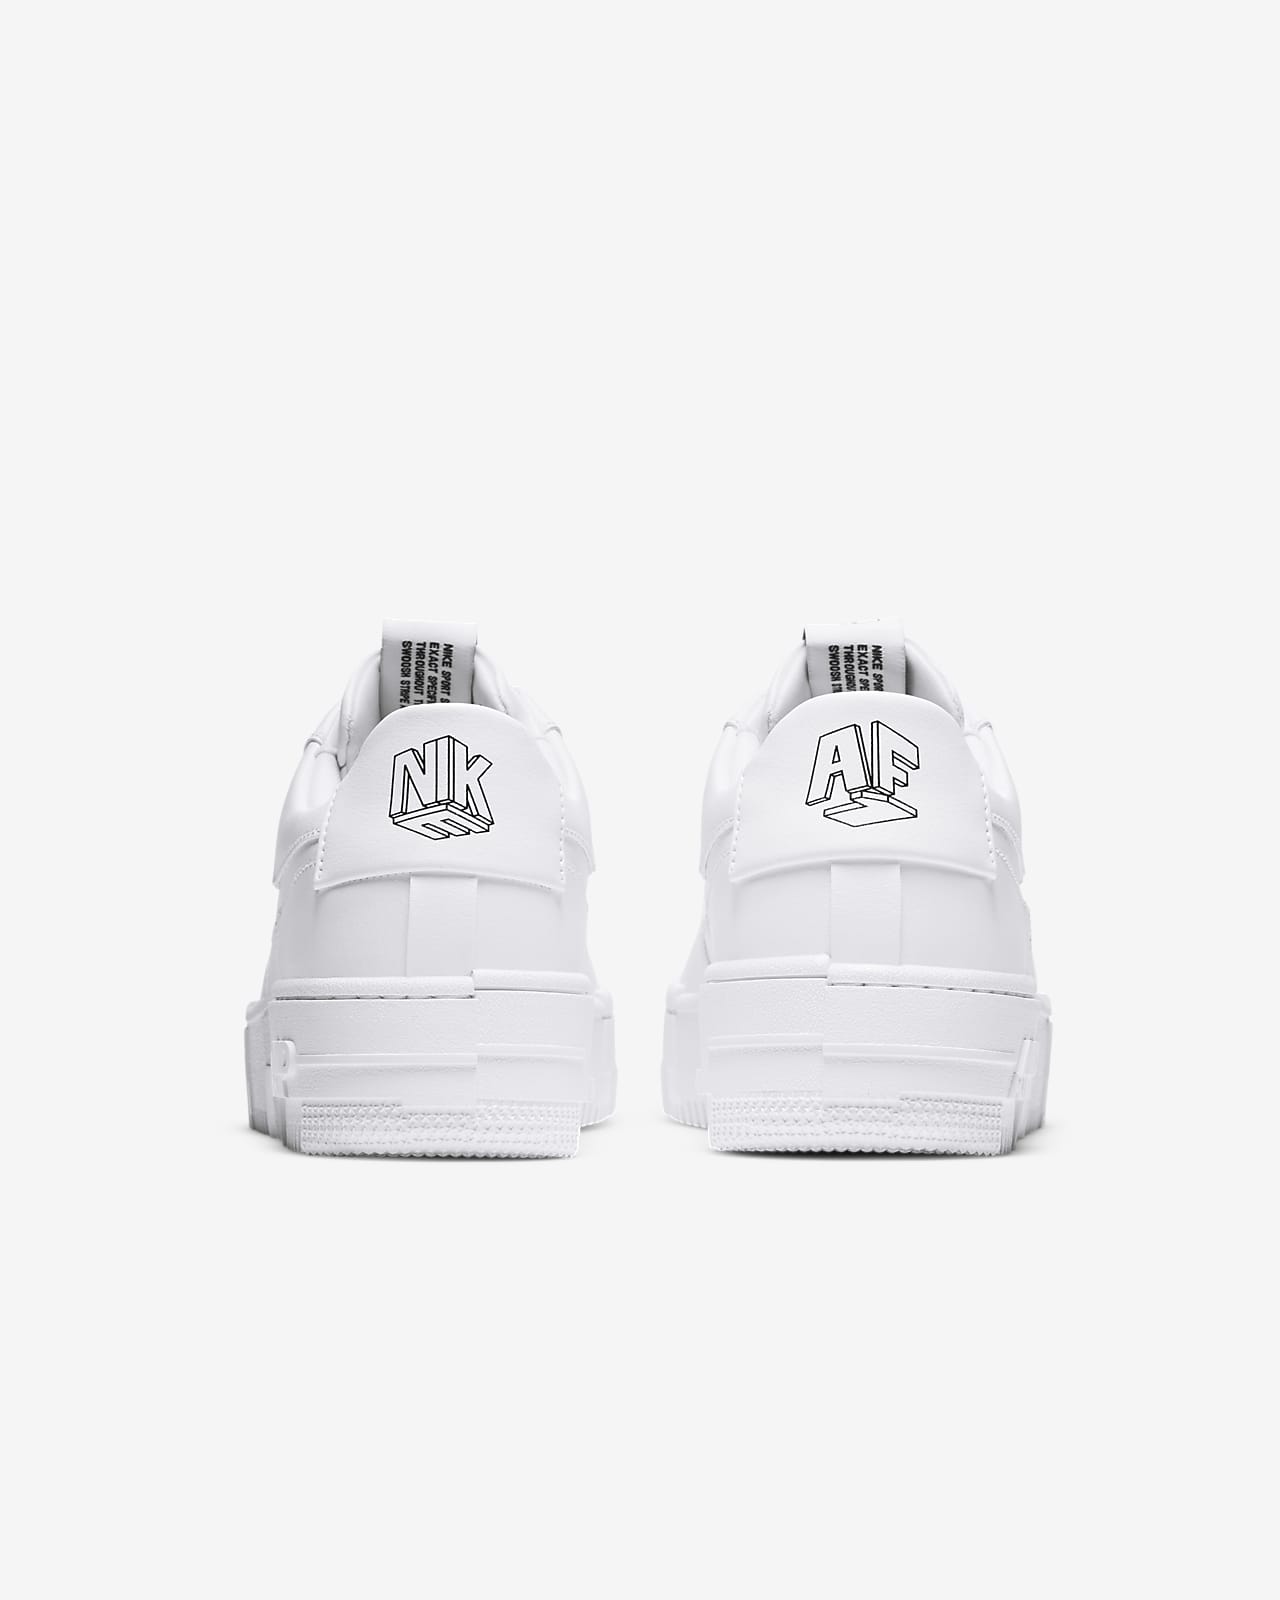 women's nike air force 1 shoes